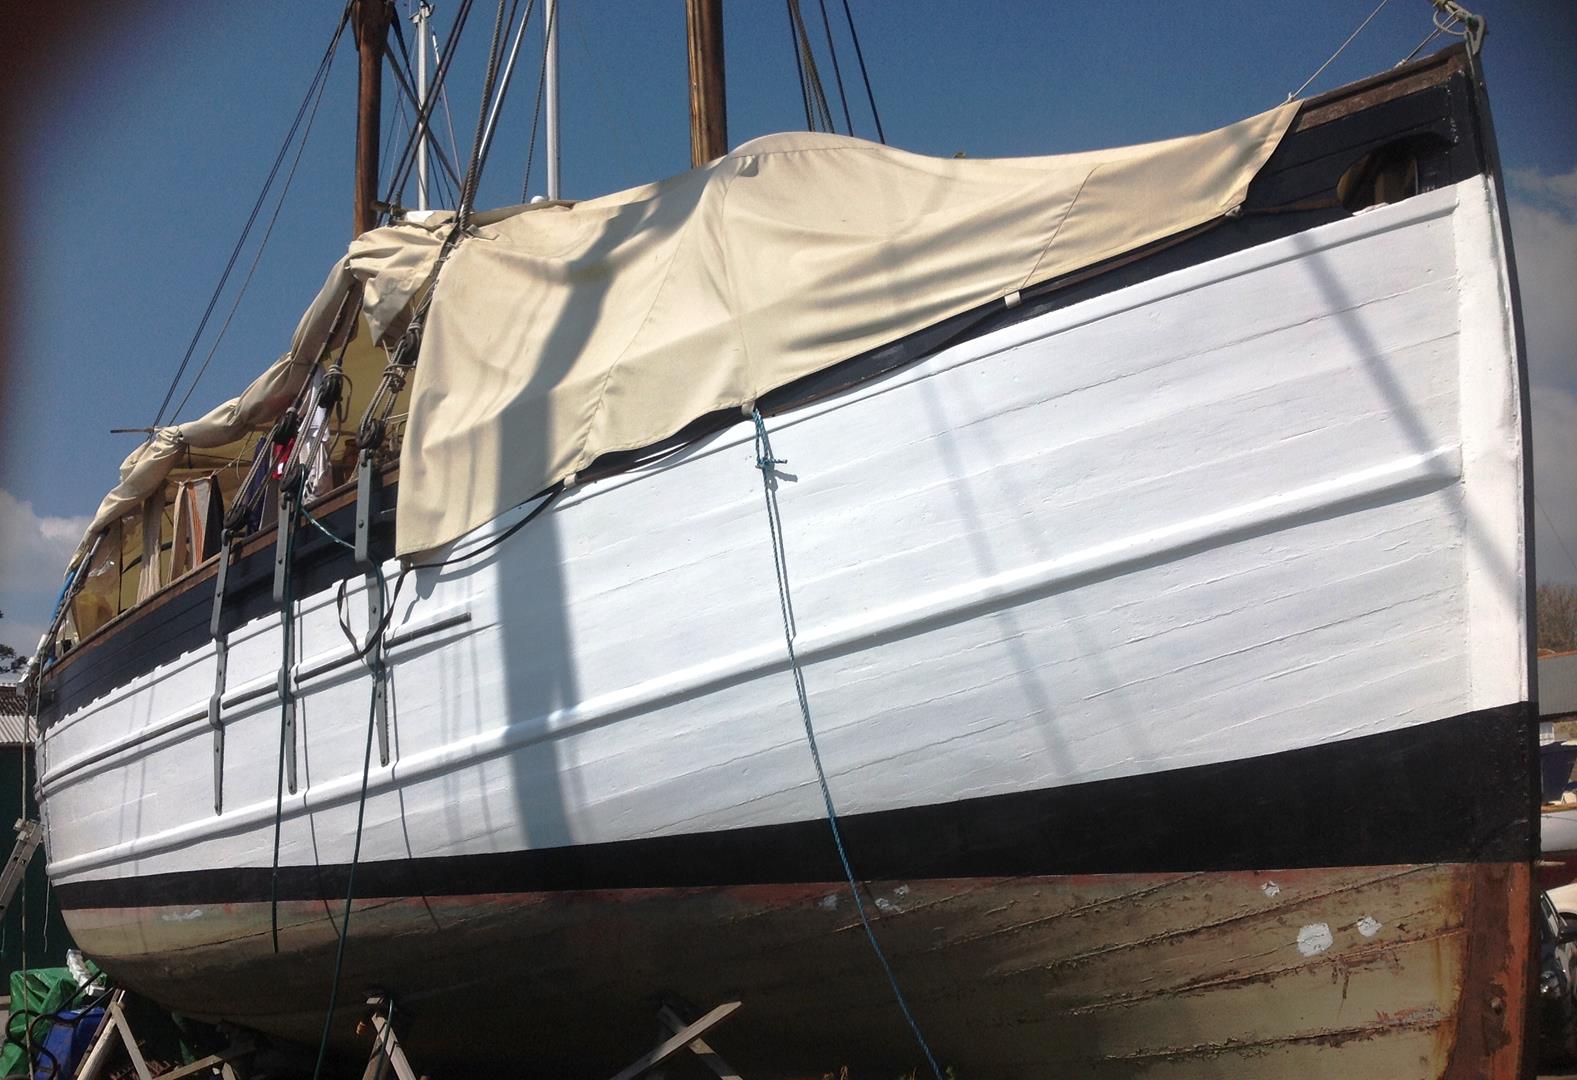 40ft. FIFIE SCOTTISH FISHING-BOAT converted to KETCH MOTOR